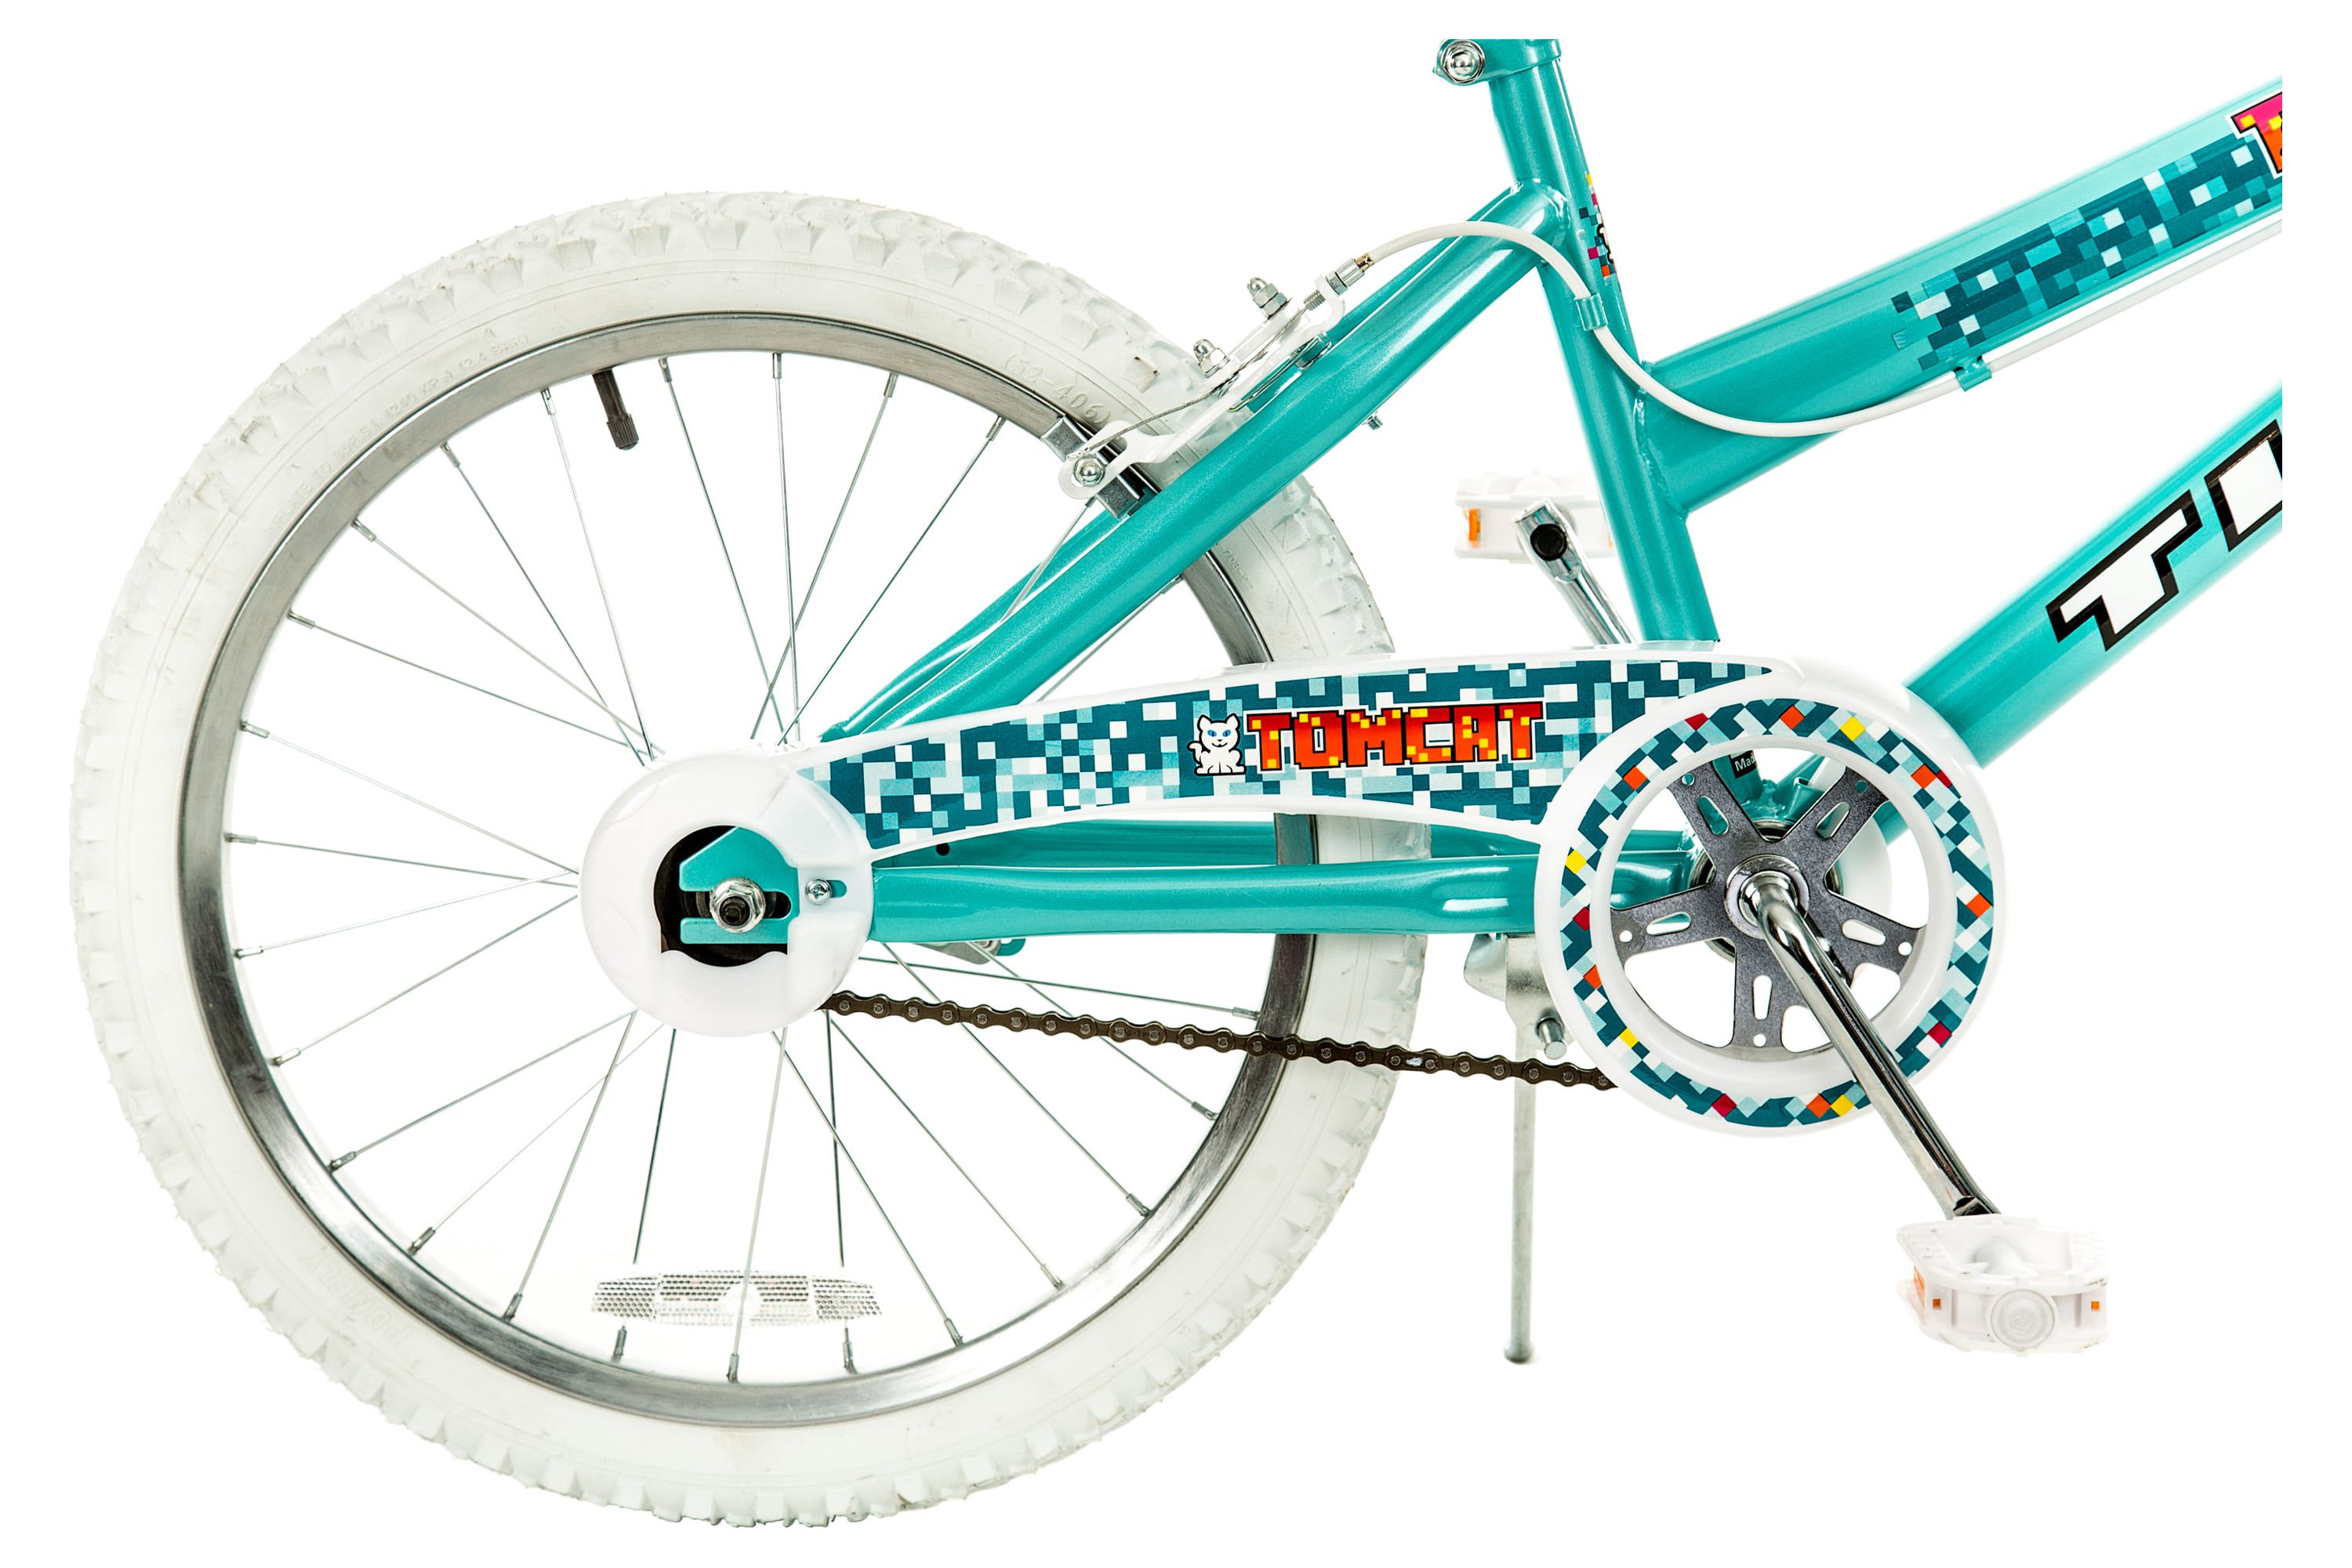 Titan 20 In. Tomcat Girls BMX Bike with Pads, Teal Blue - image 5 of 5